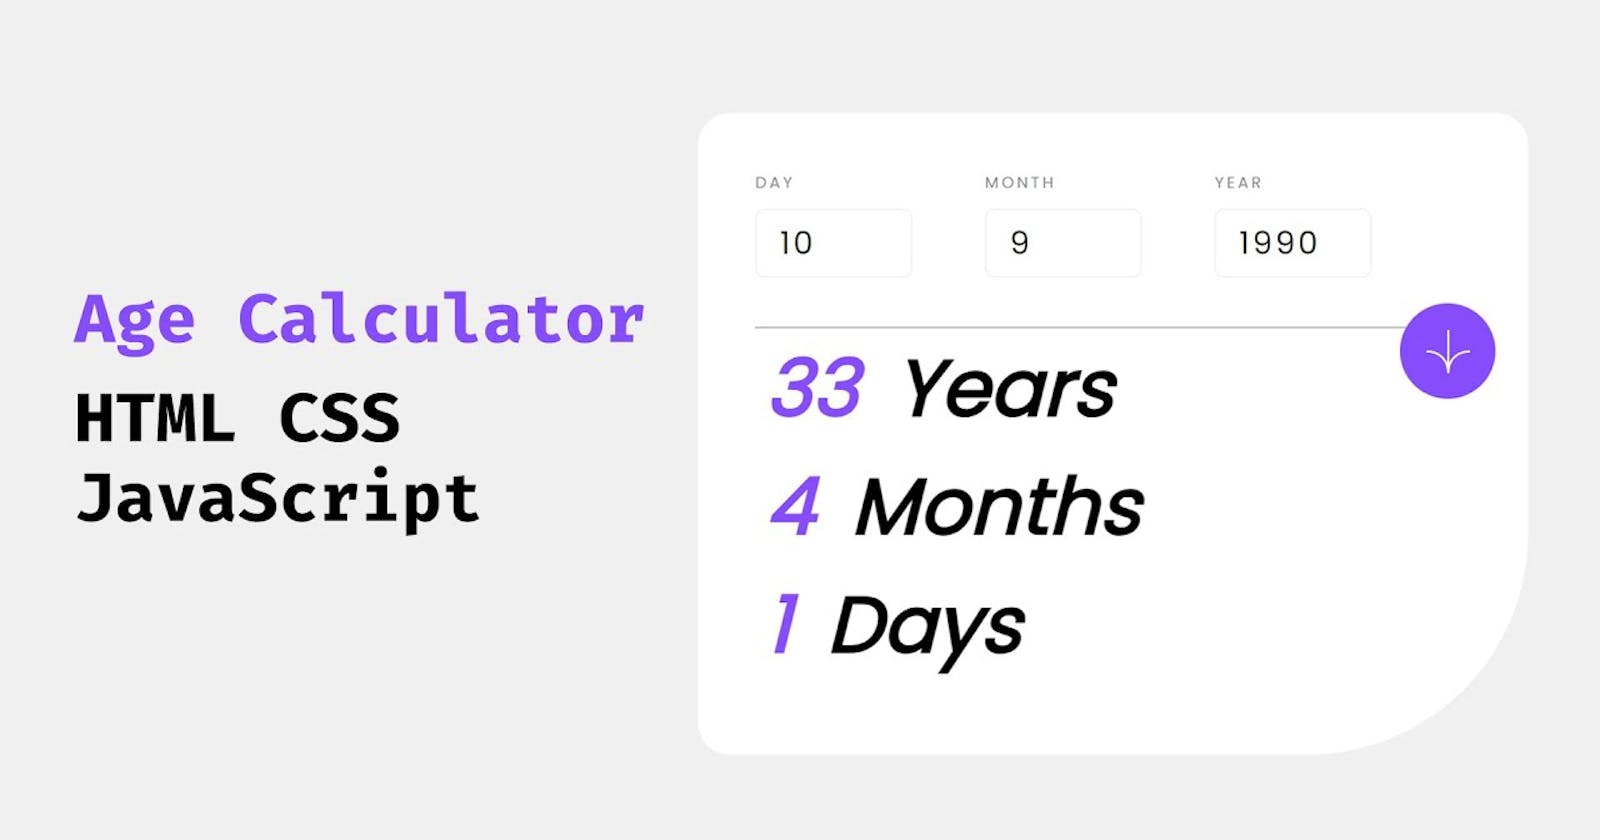 Age Calculator App Using HTML CSS and JavaScript